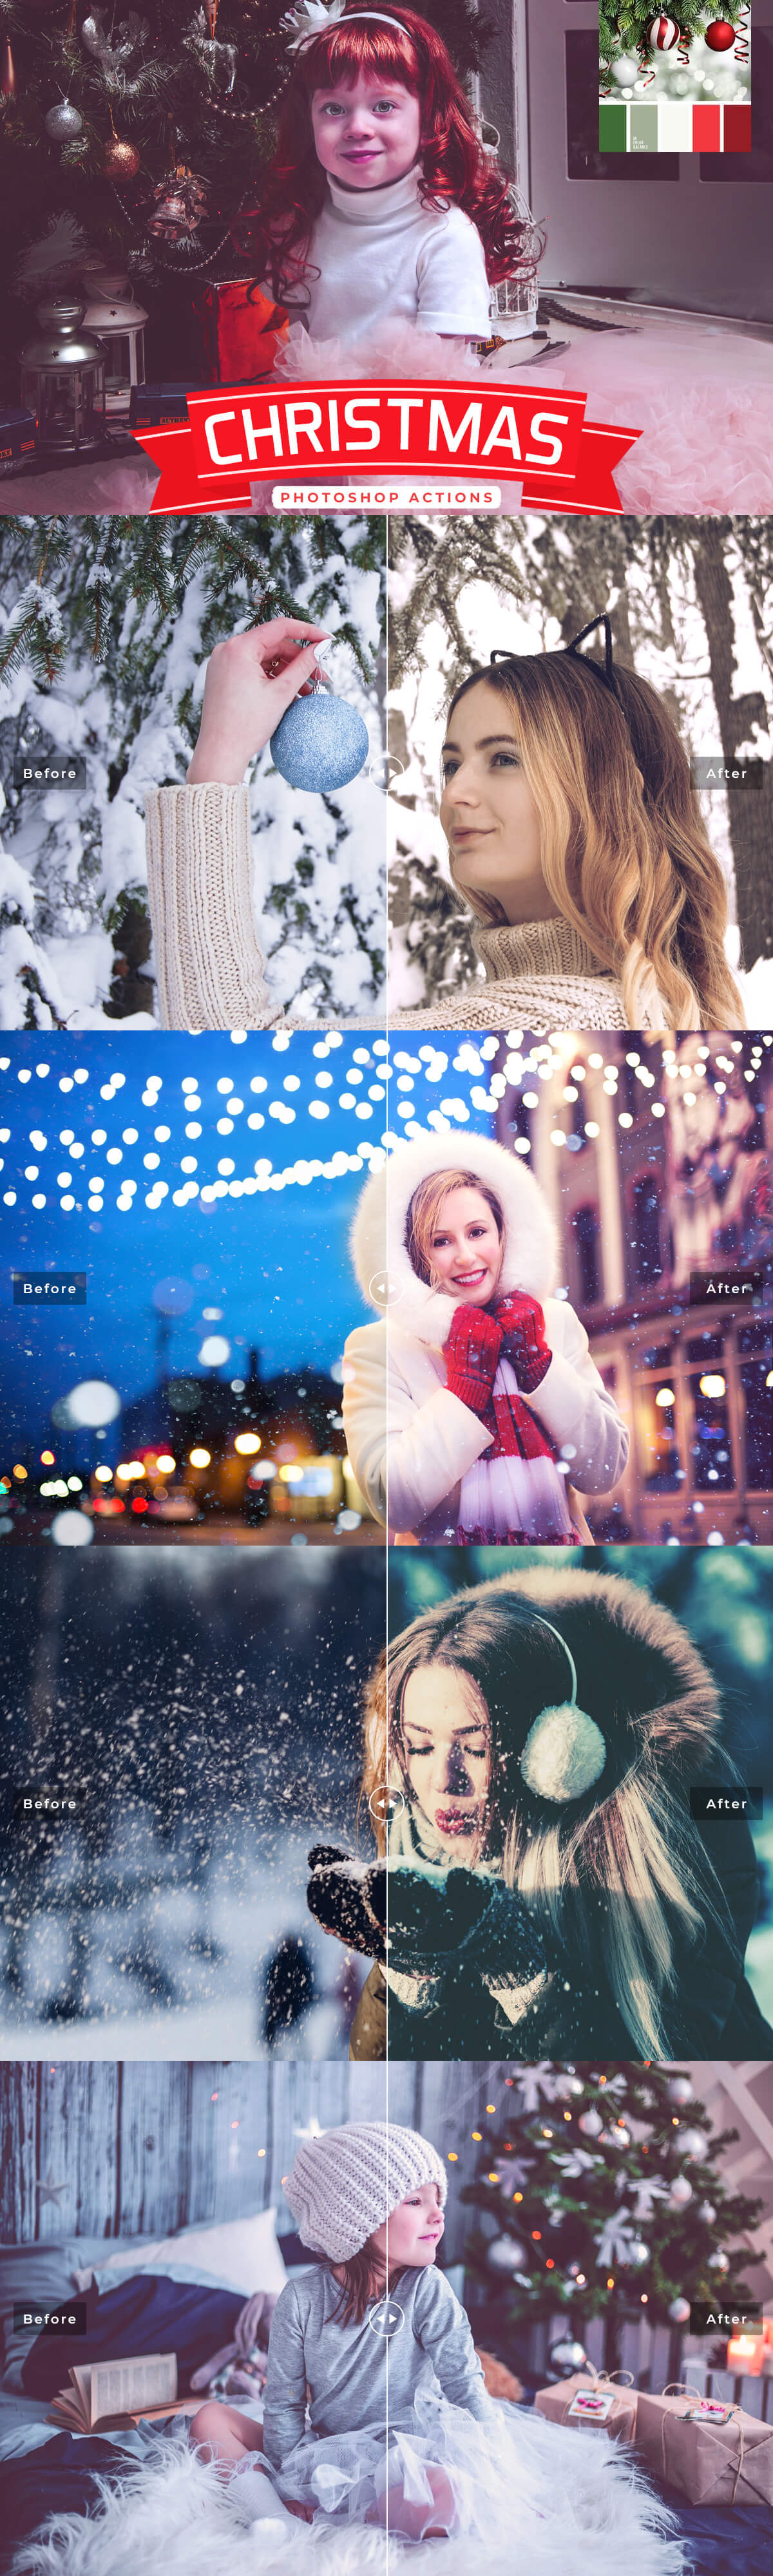 6 Free Christmas Photoshop Actions